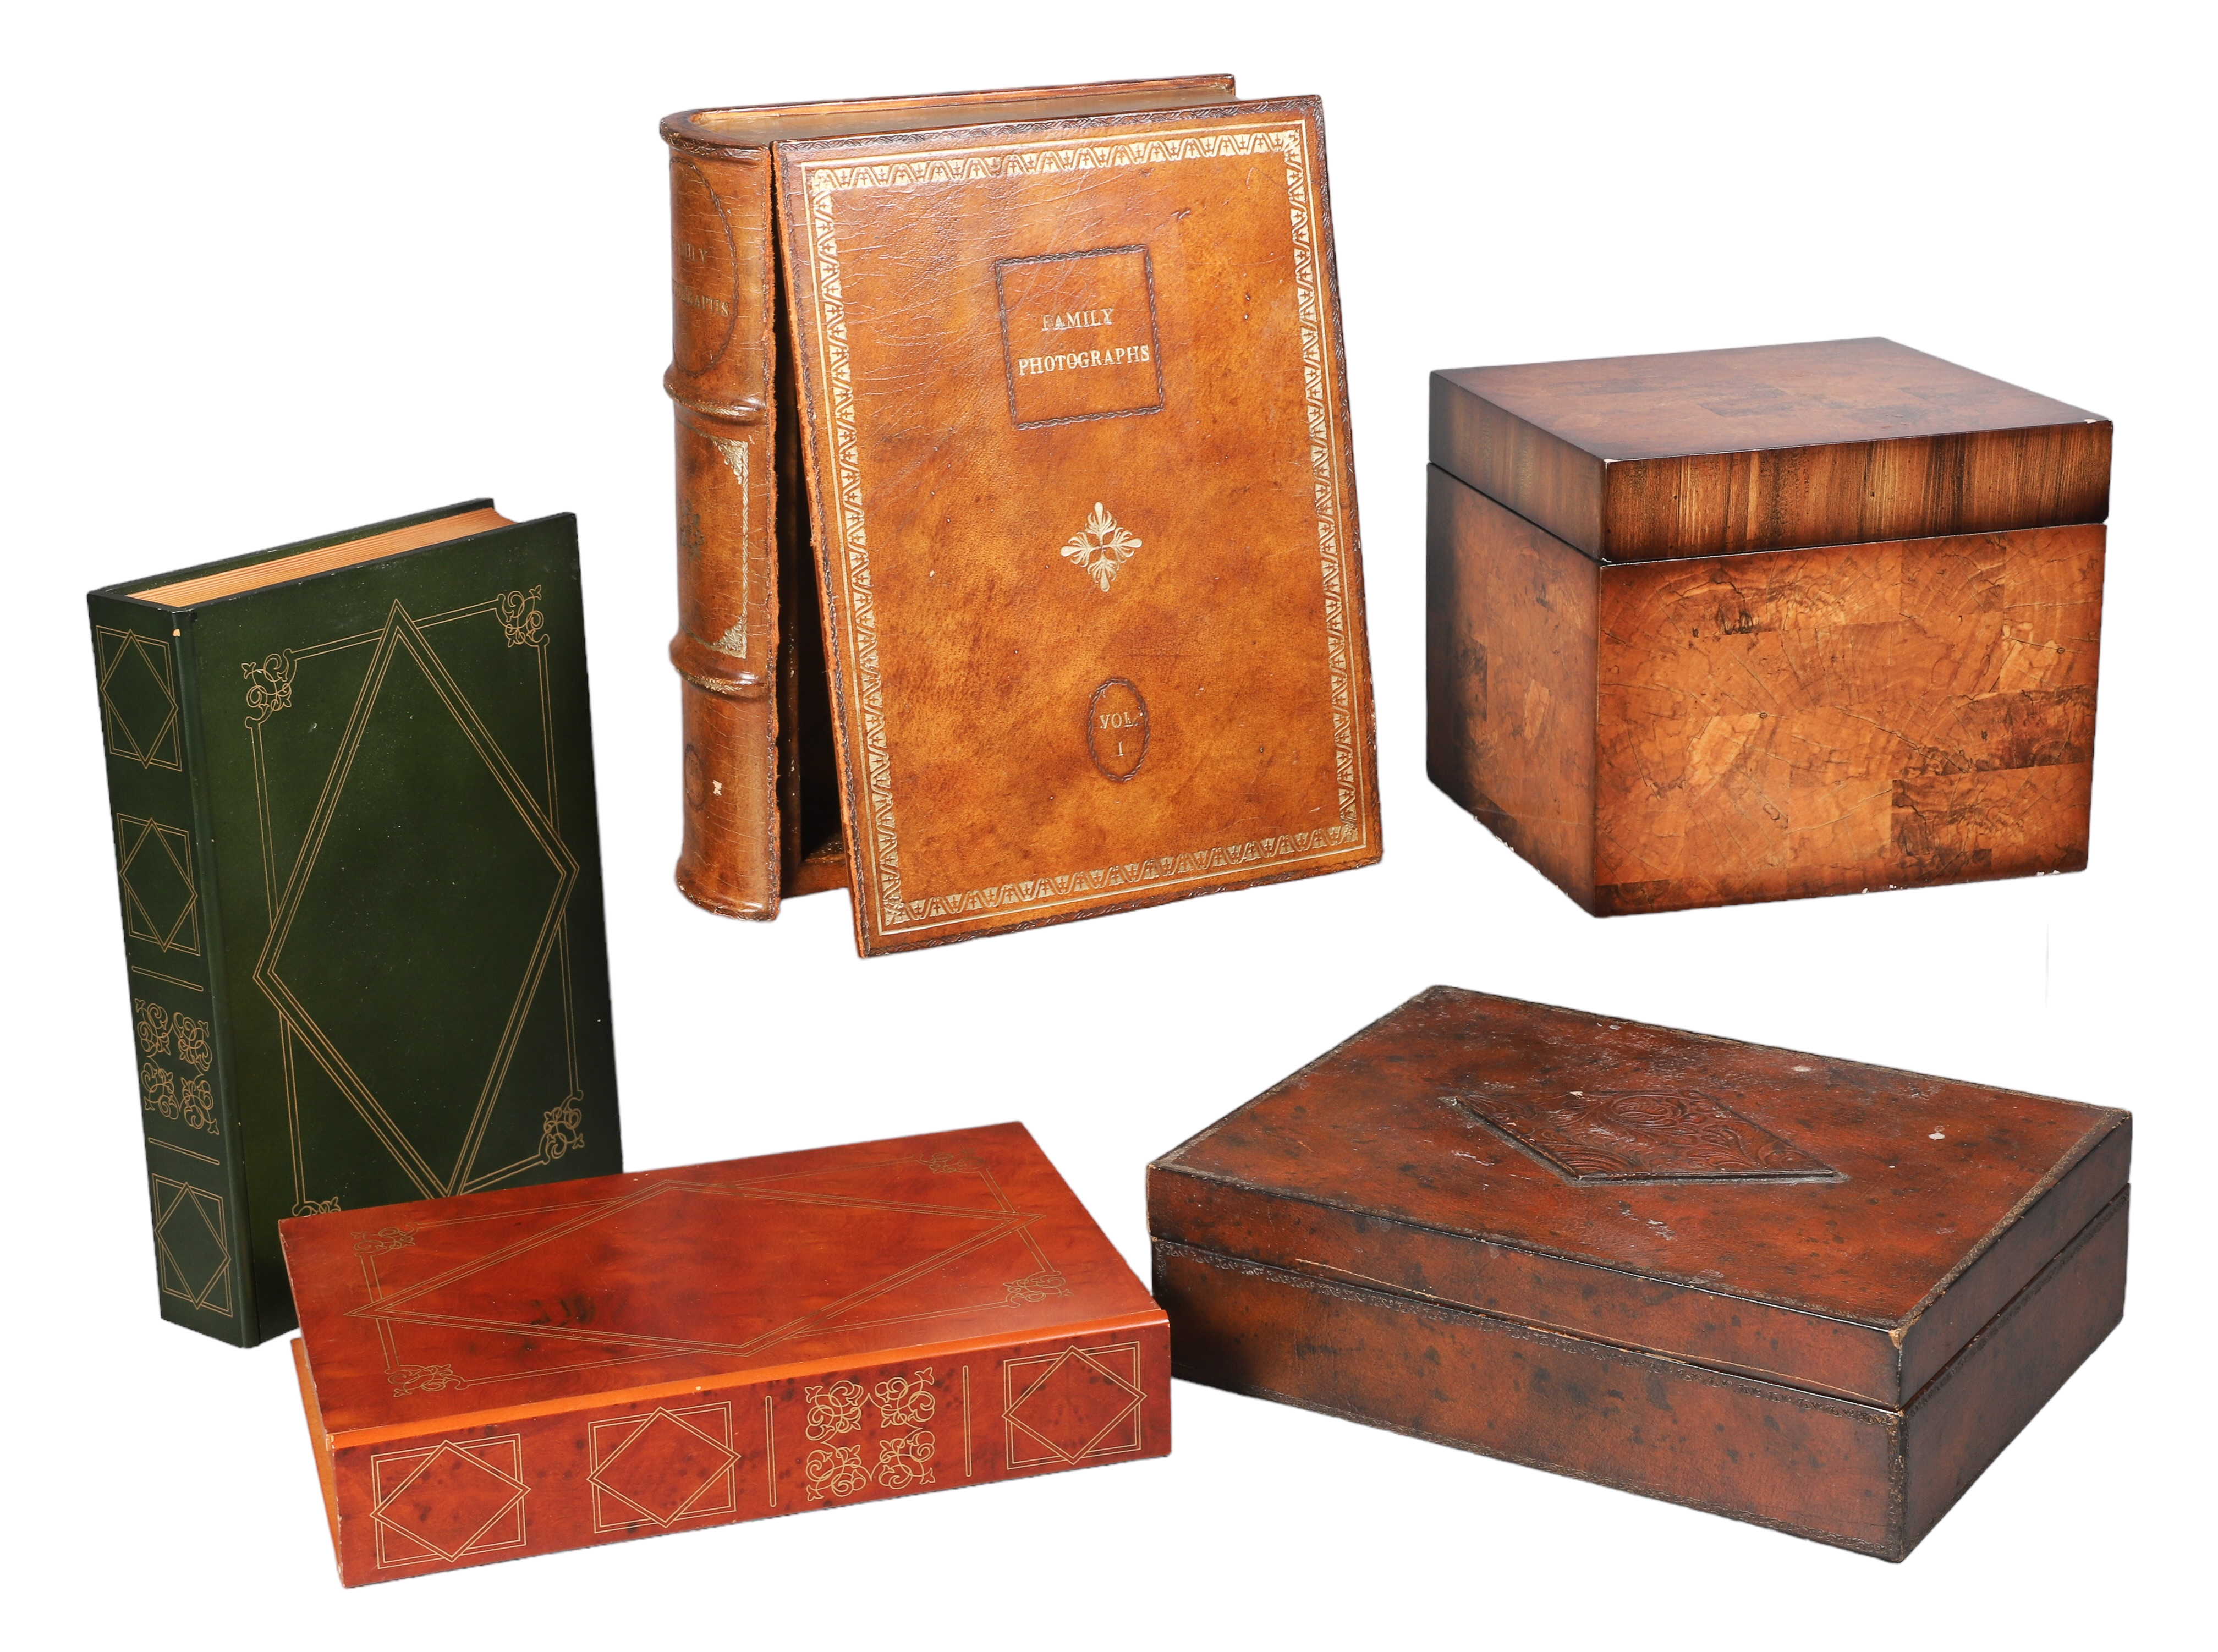  5 Decorative and book form boxes 317fbe